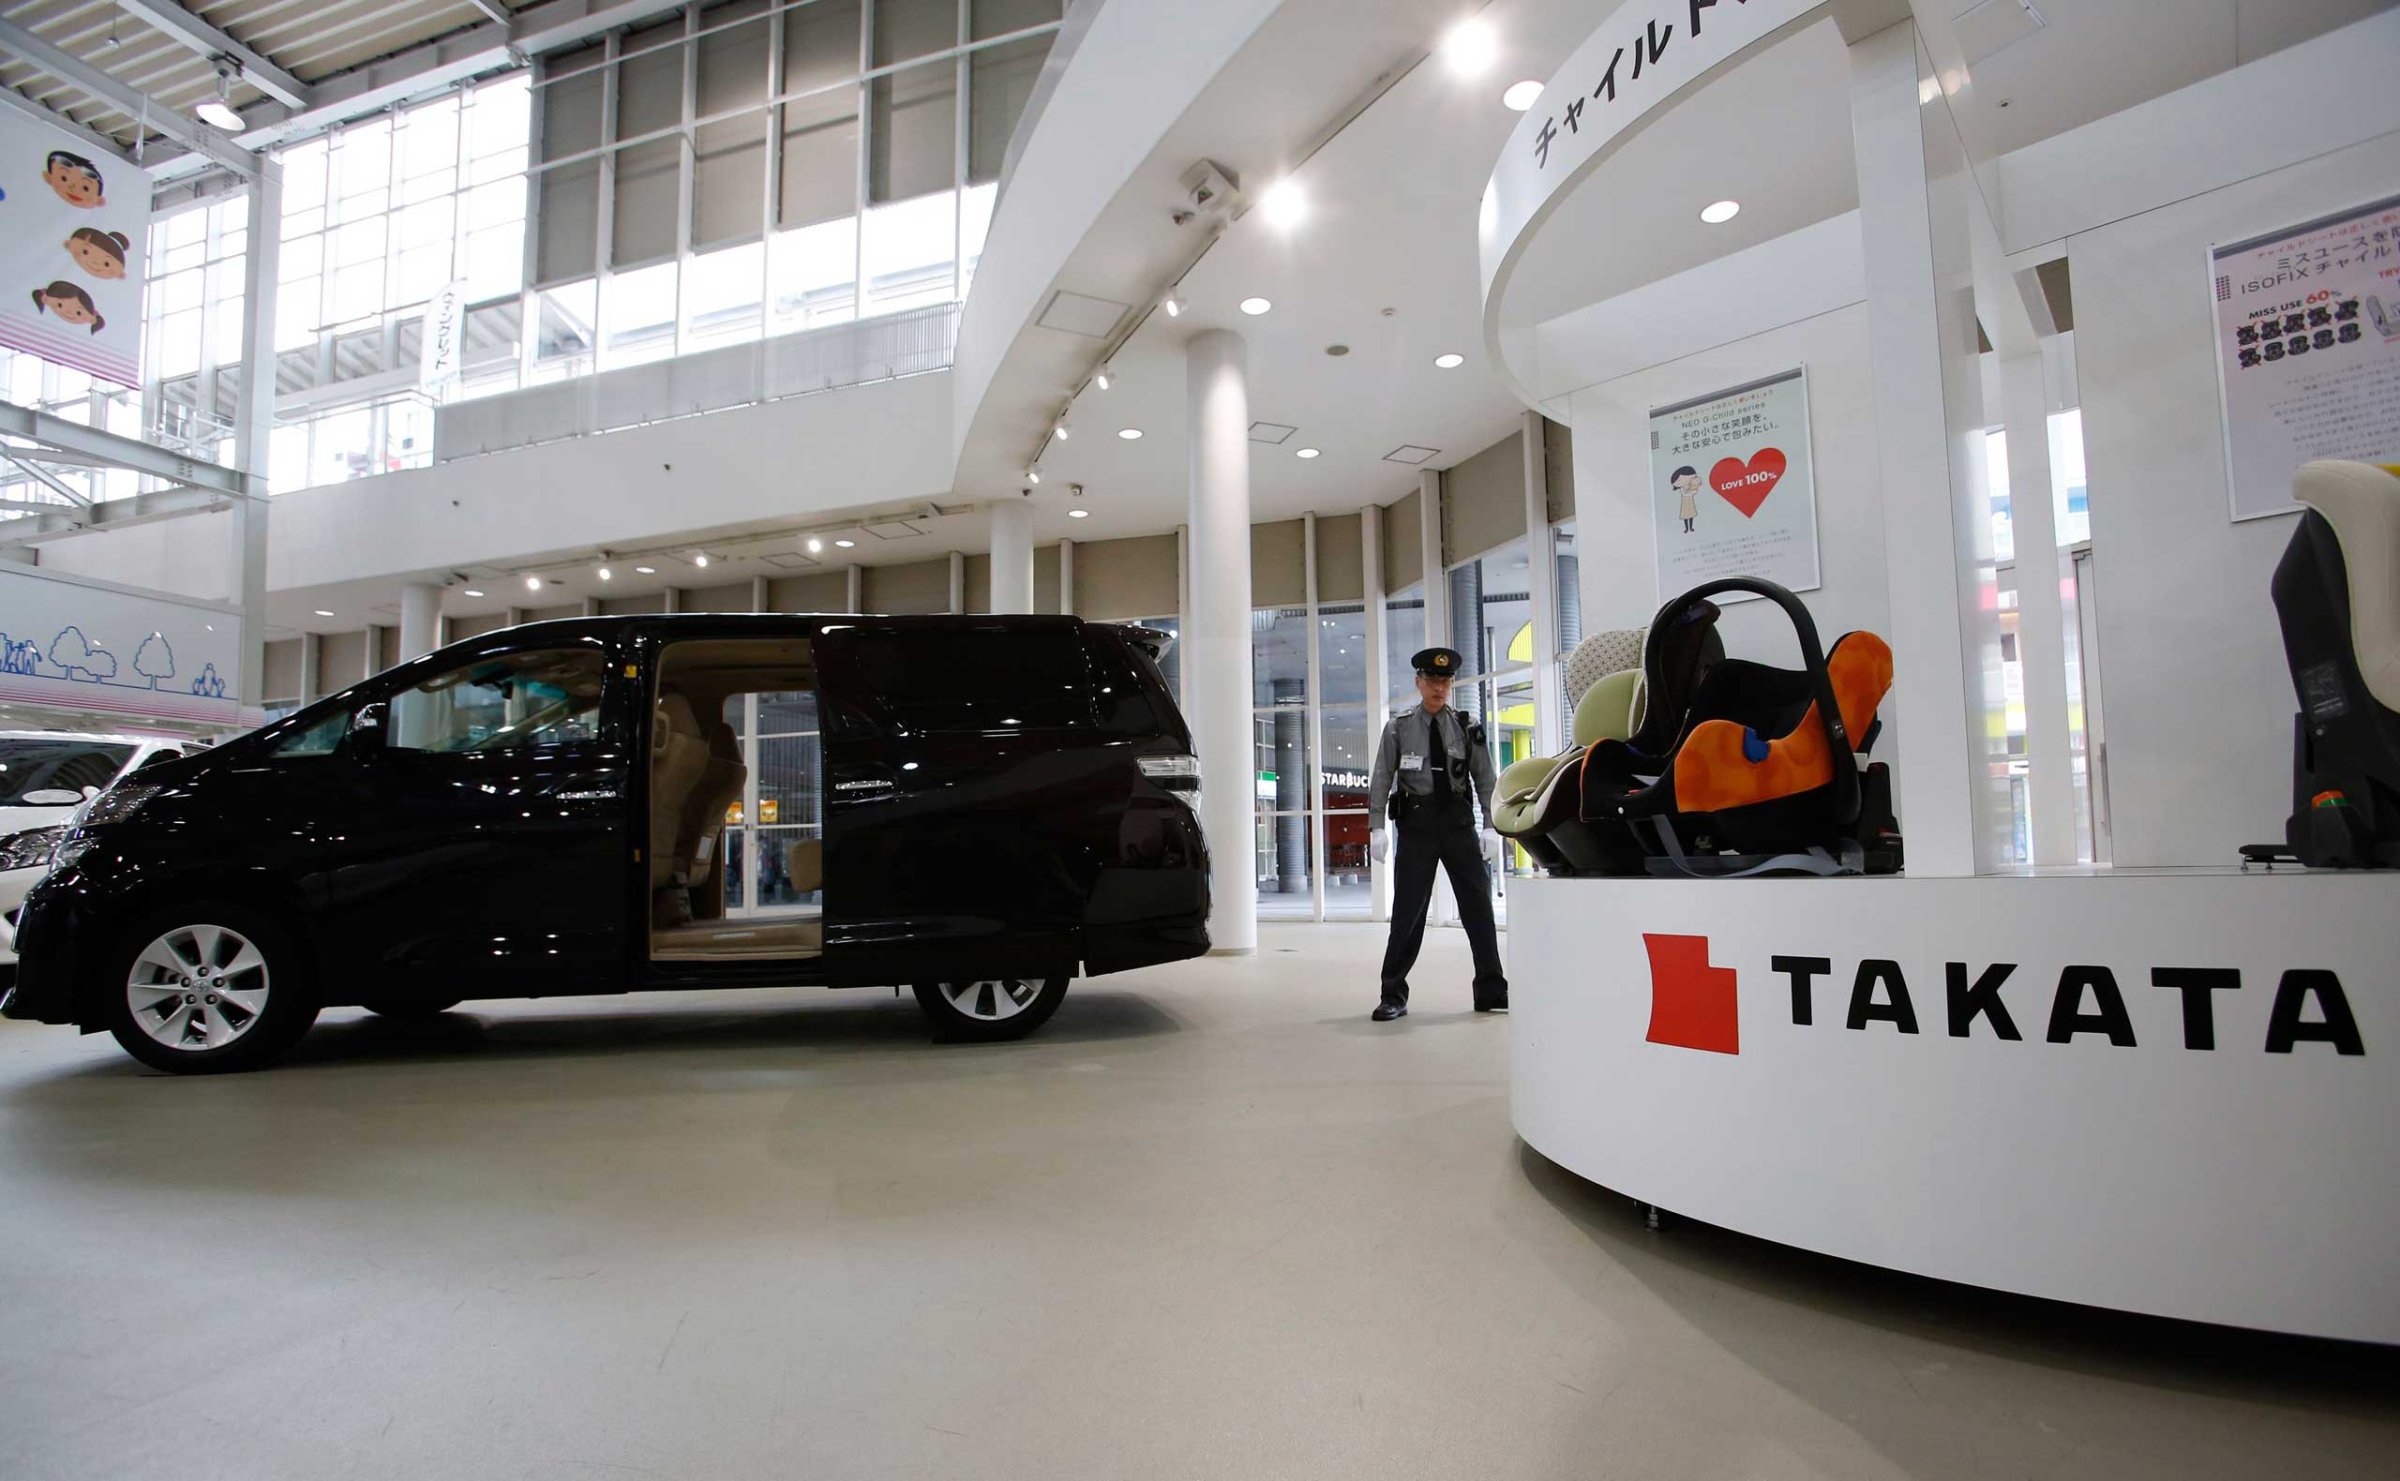 A security guard stands by child seats, manufactured and displayed by Takata Corp. at a Toyota showroom in Tokyo, Nov. 6, 2014.